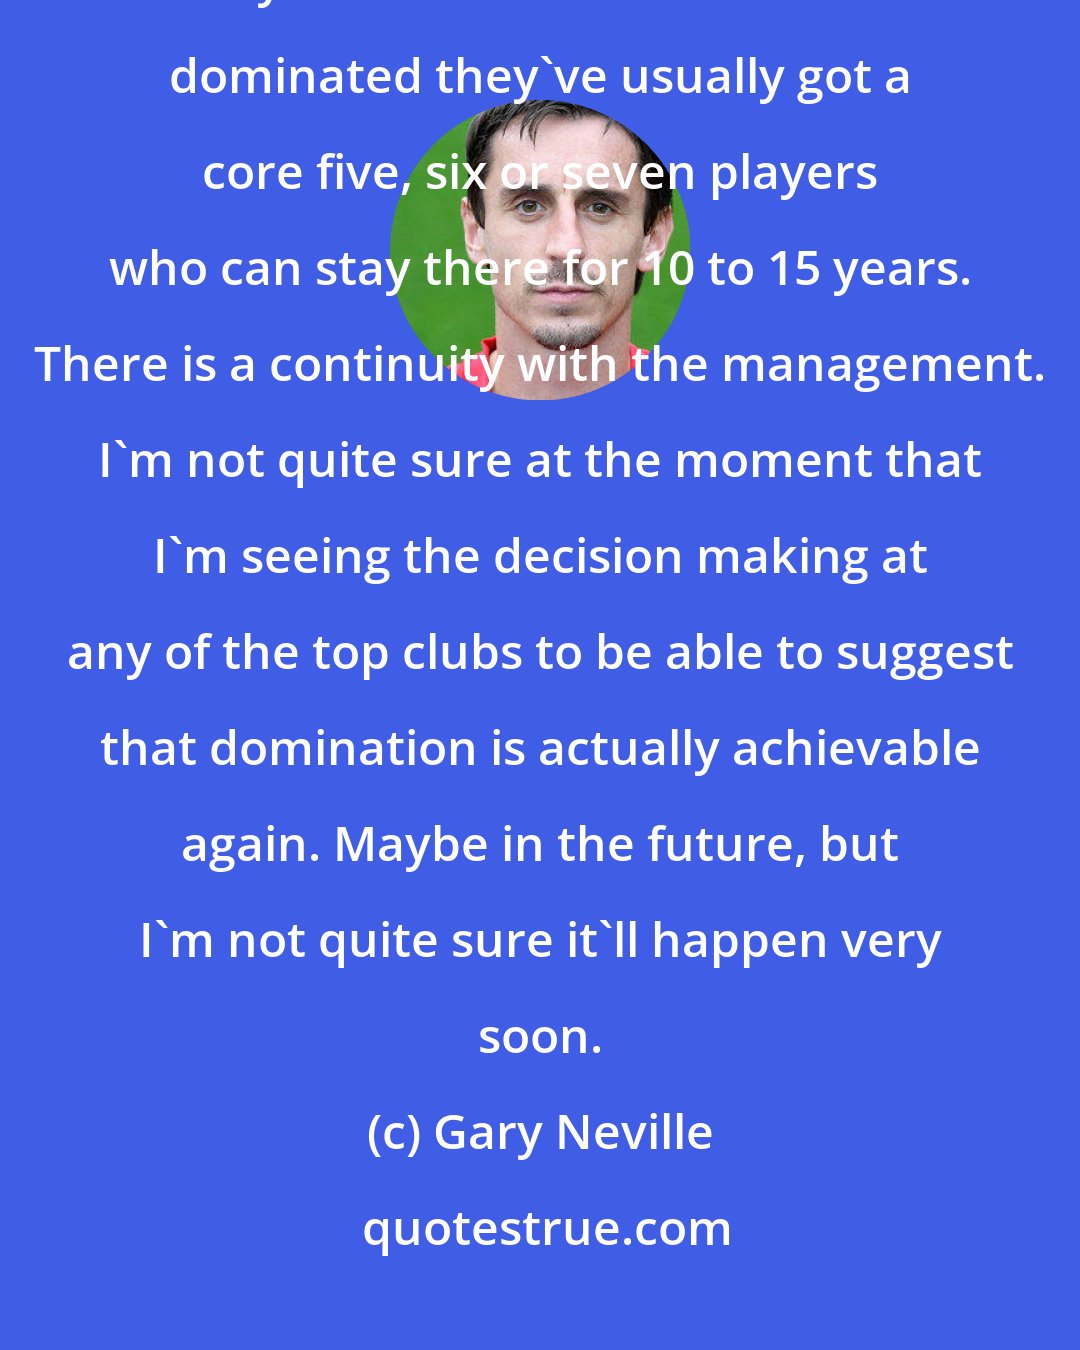 Gary Neville: Will any club dominate again? Are any club set up to dominate again? When you look at the clubs that have dominated they've usually got a core five, six or seven players who can stay there for 10 to 15 years. There is a continuity with the management. I'm not quite sure at the moment that I'm seeing the decision making at any of the top clubs to be able to suggest that domination is actually achievable again. Maybe in the future, but I'm not quite sure it'll happen very soon.